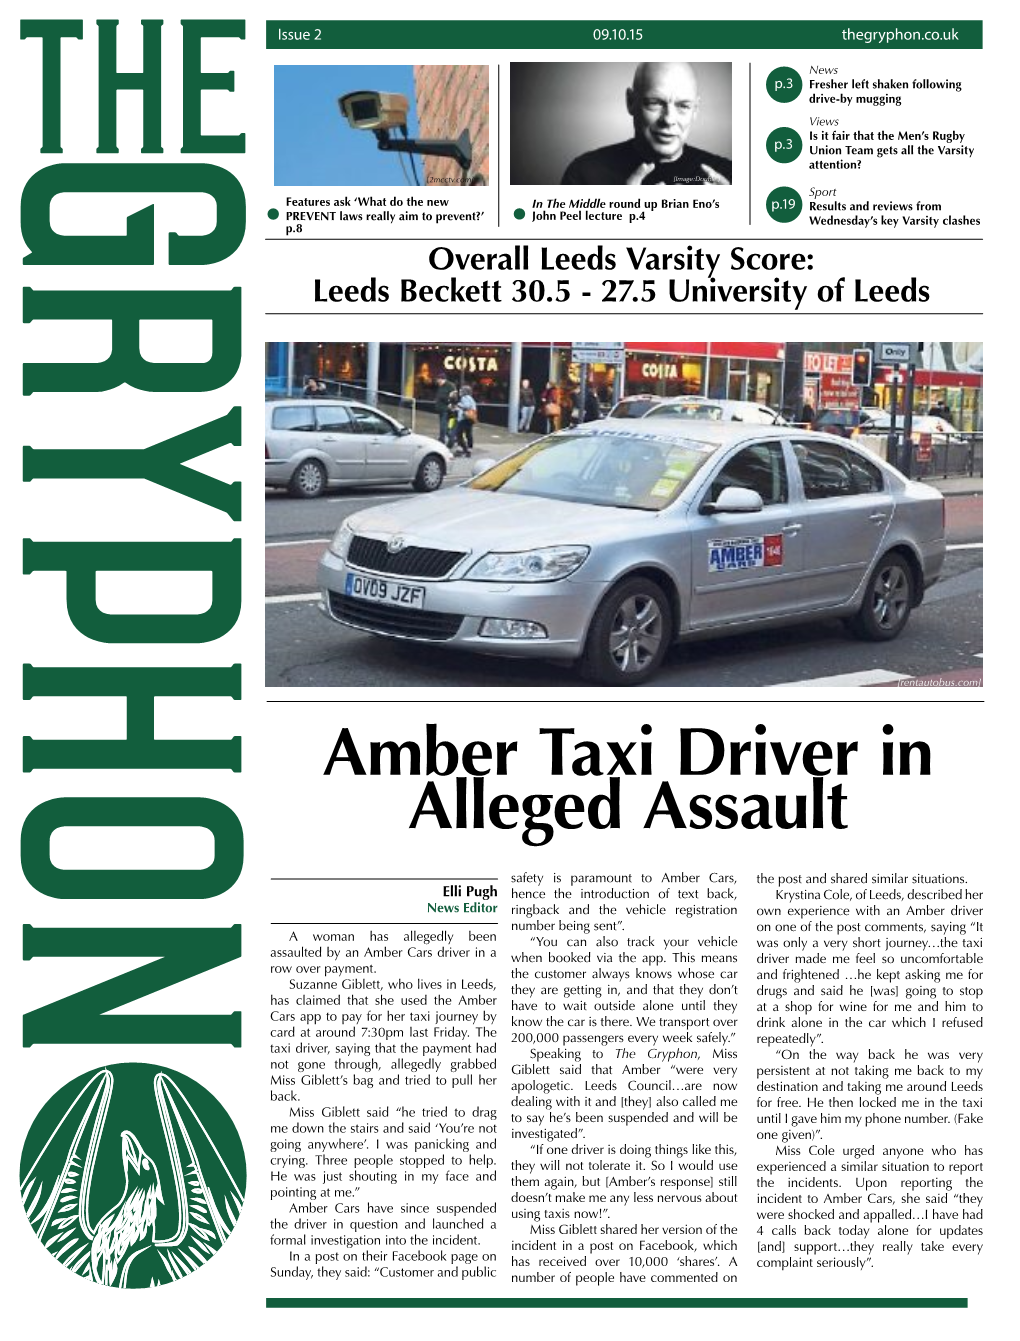 Amber Taxi Driver in Alleged Assault